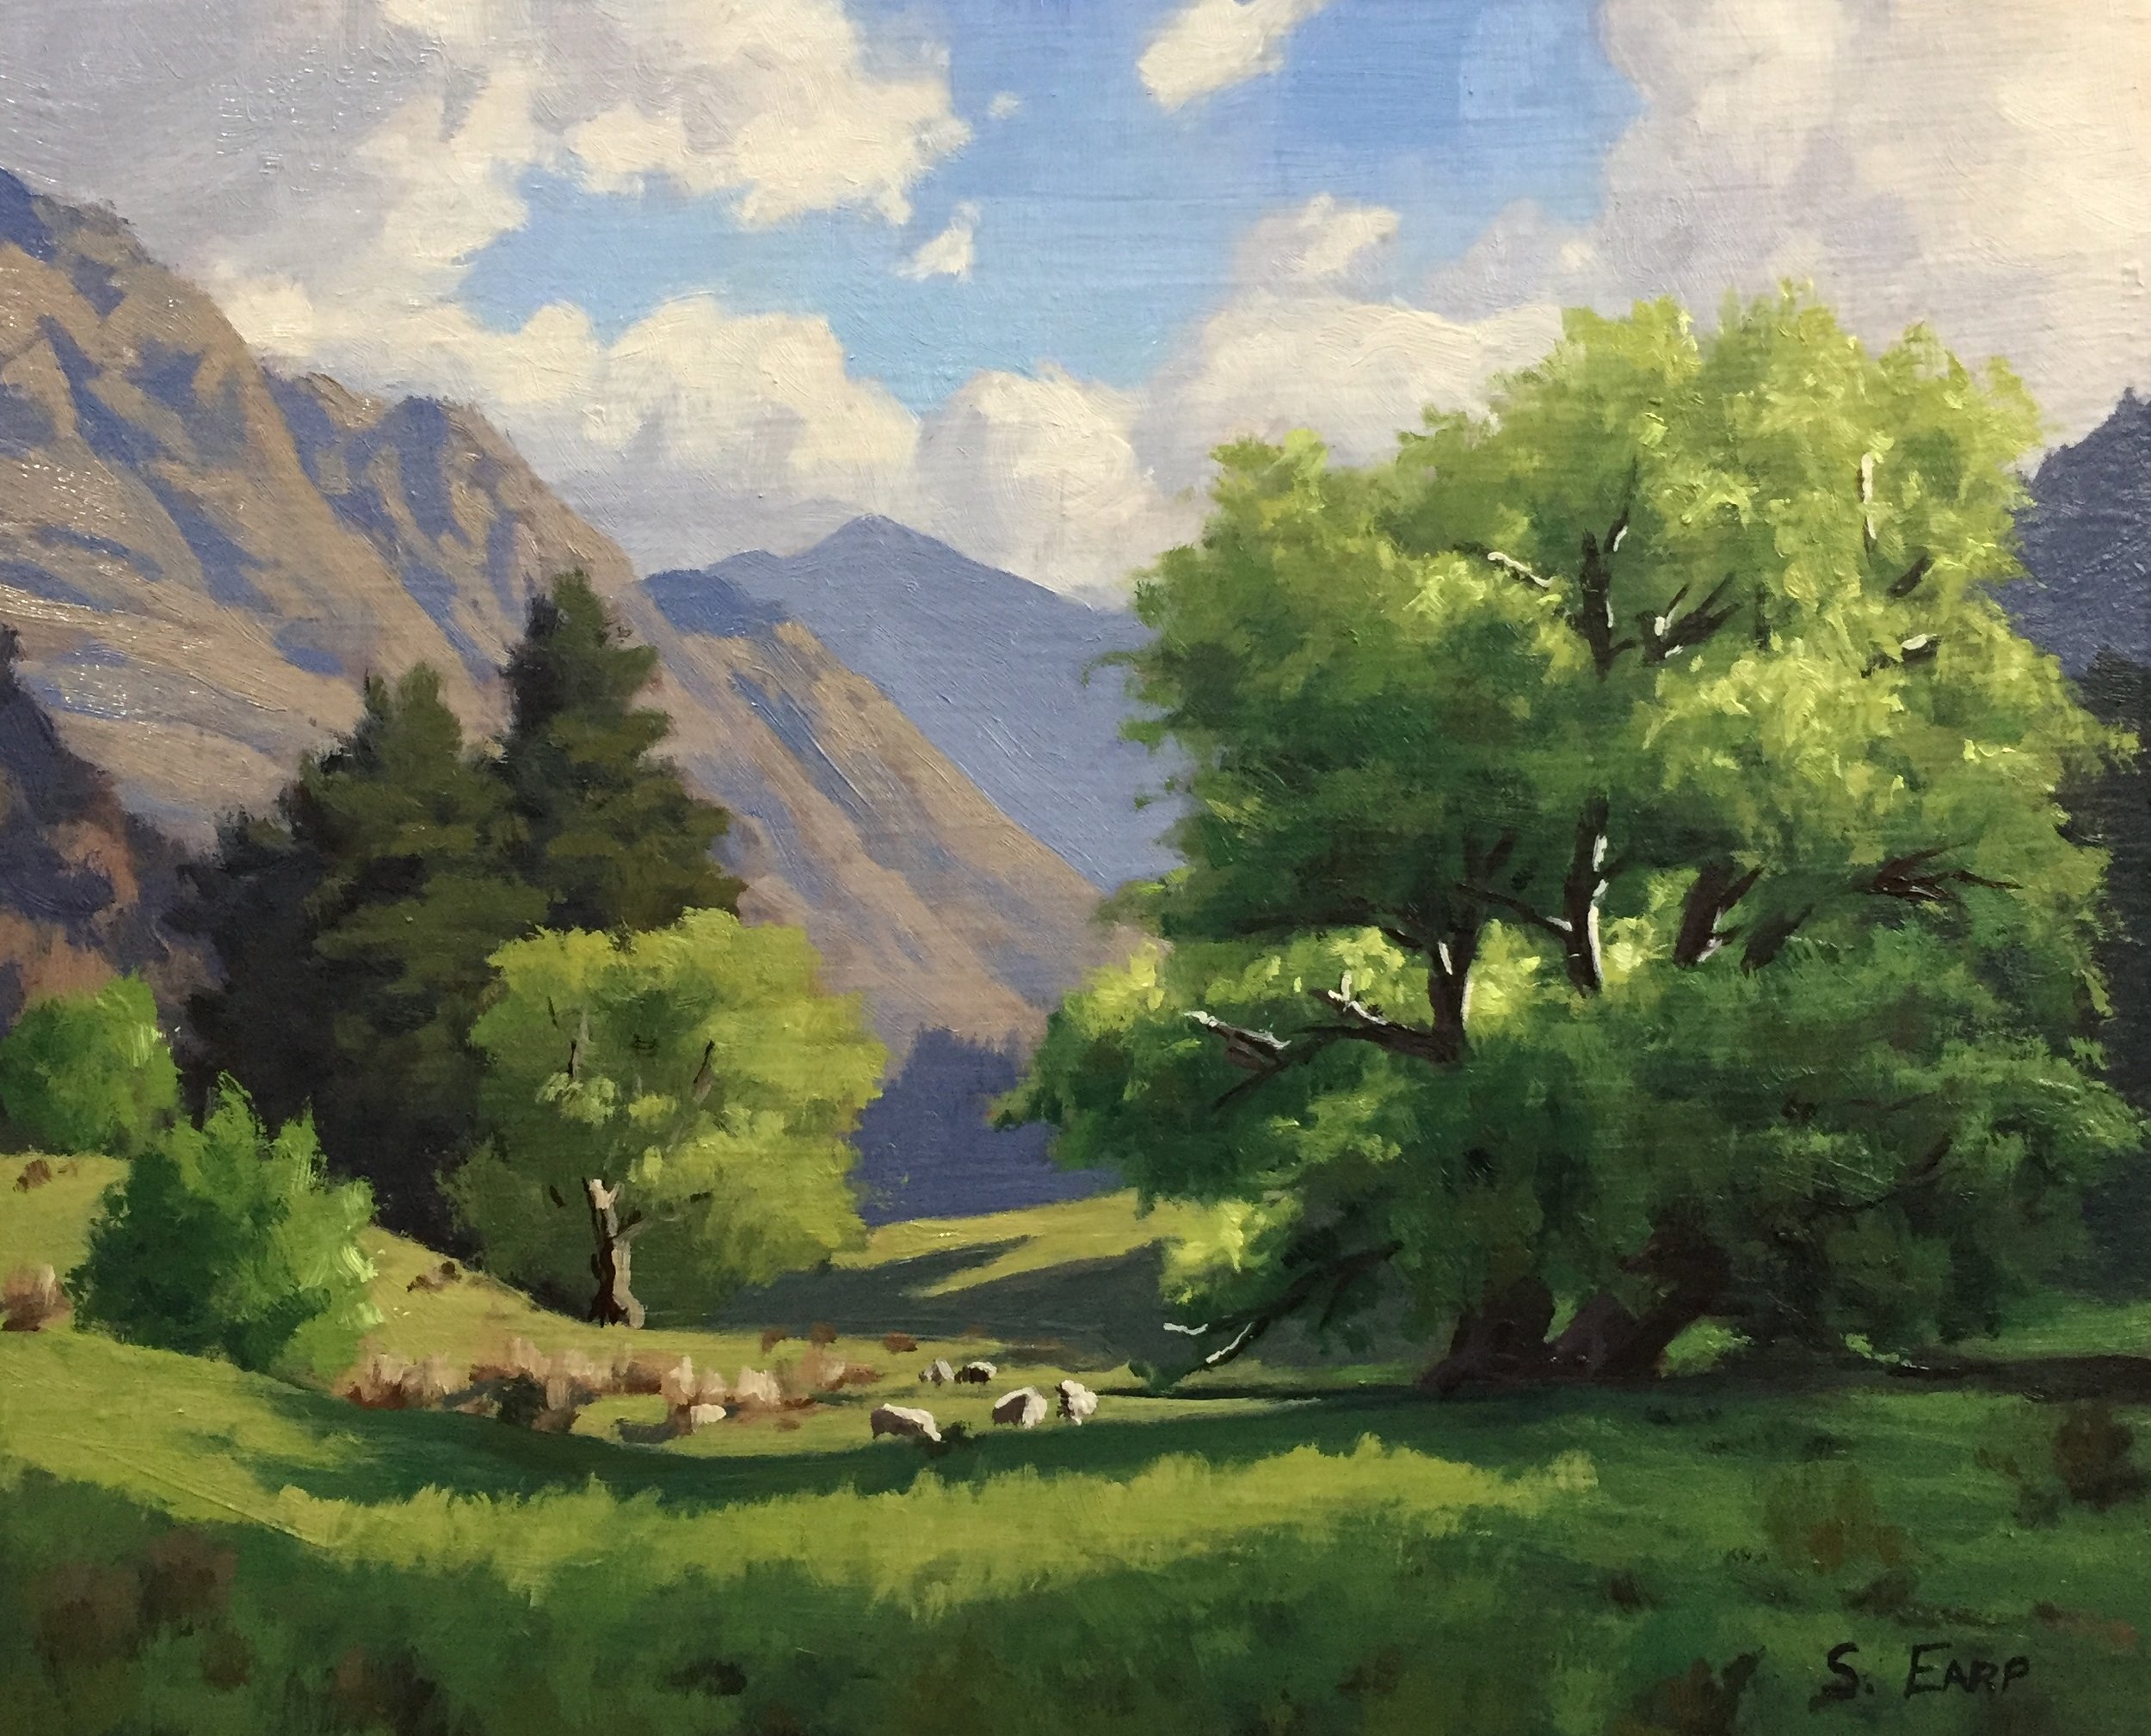 Willow Trees, Queenstown, 8” x 10”, oil on wooden panel